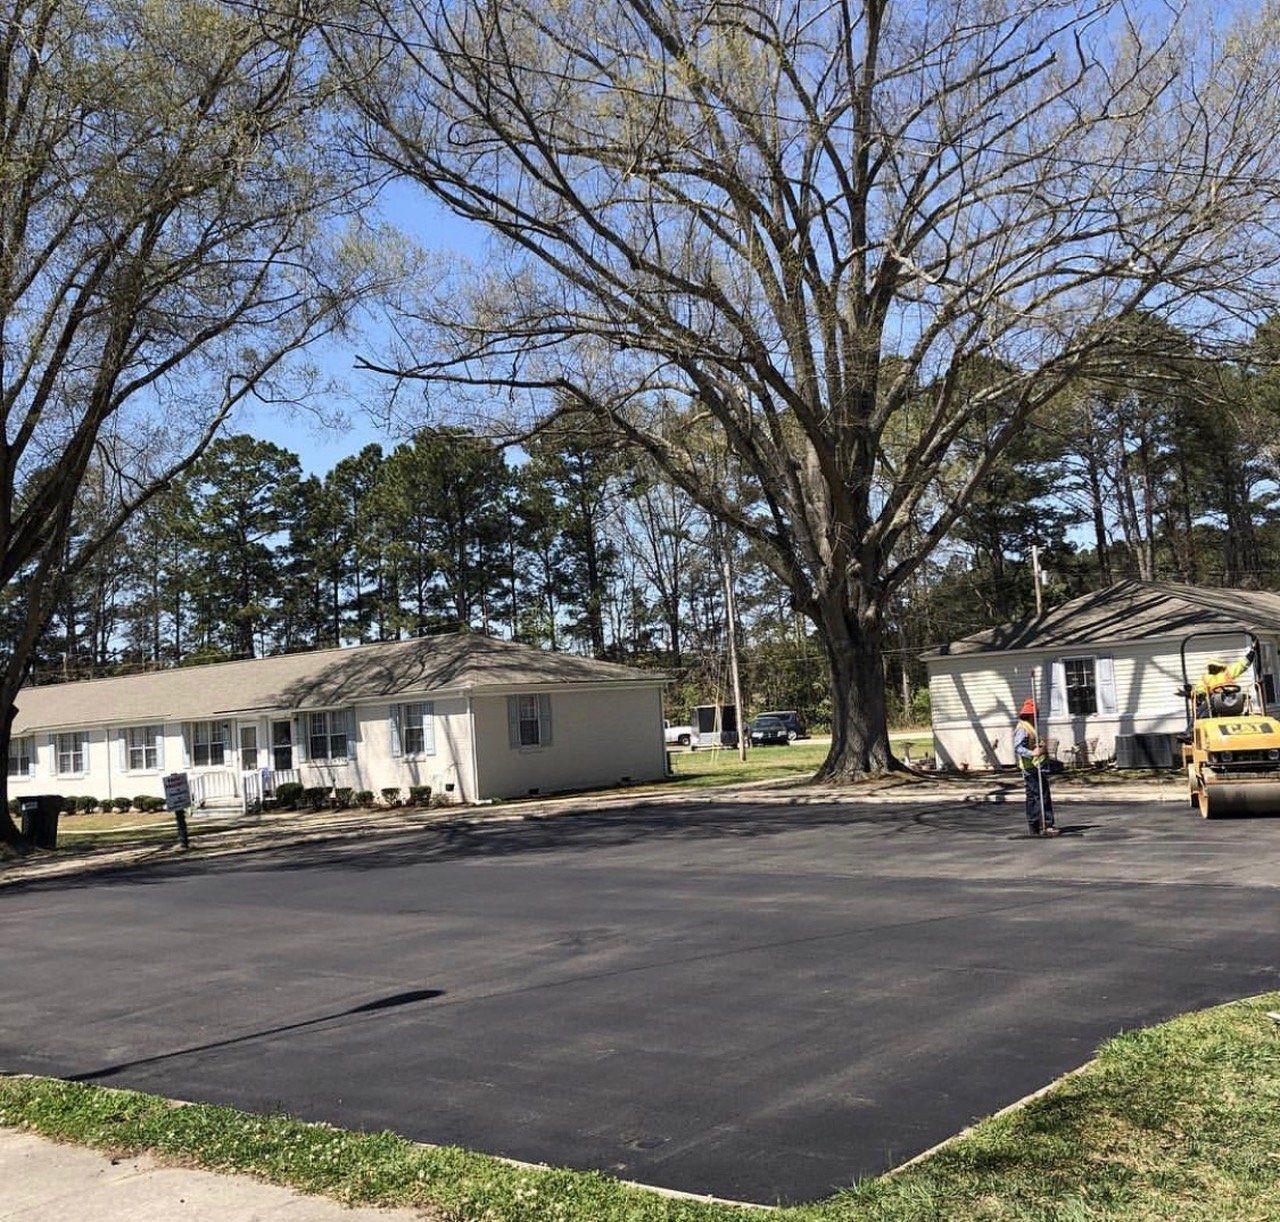 Road Paving in Greenville, Knightdale, & Rocky Mount, NC